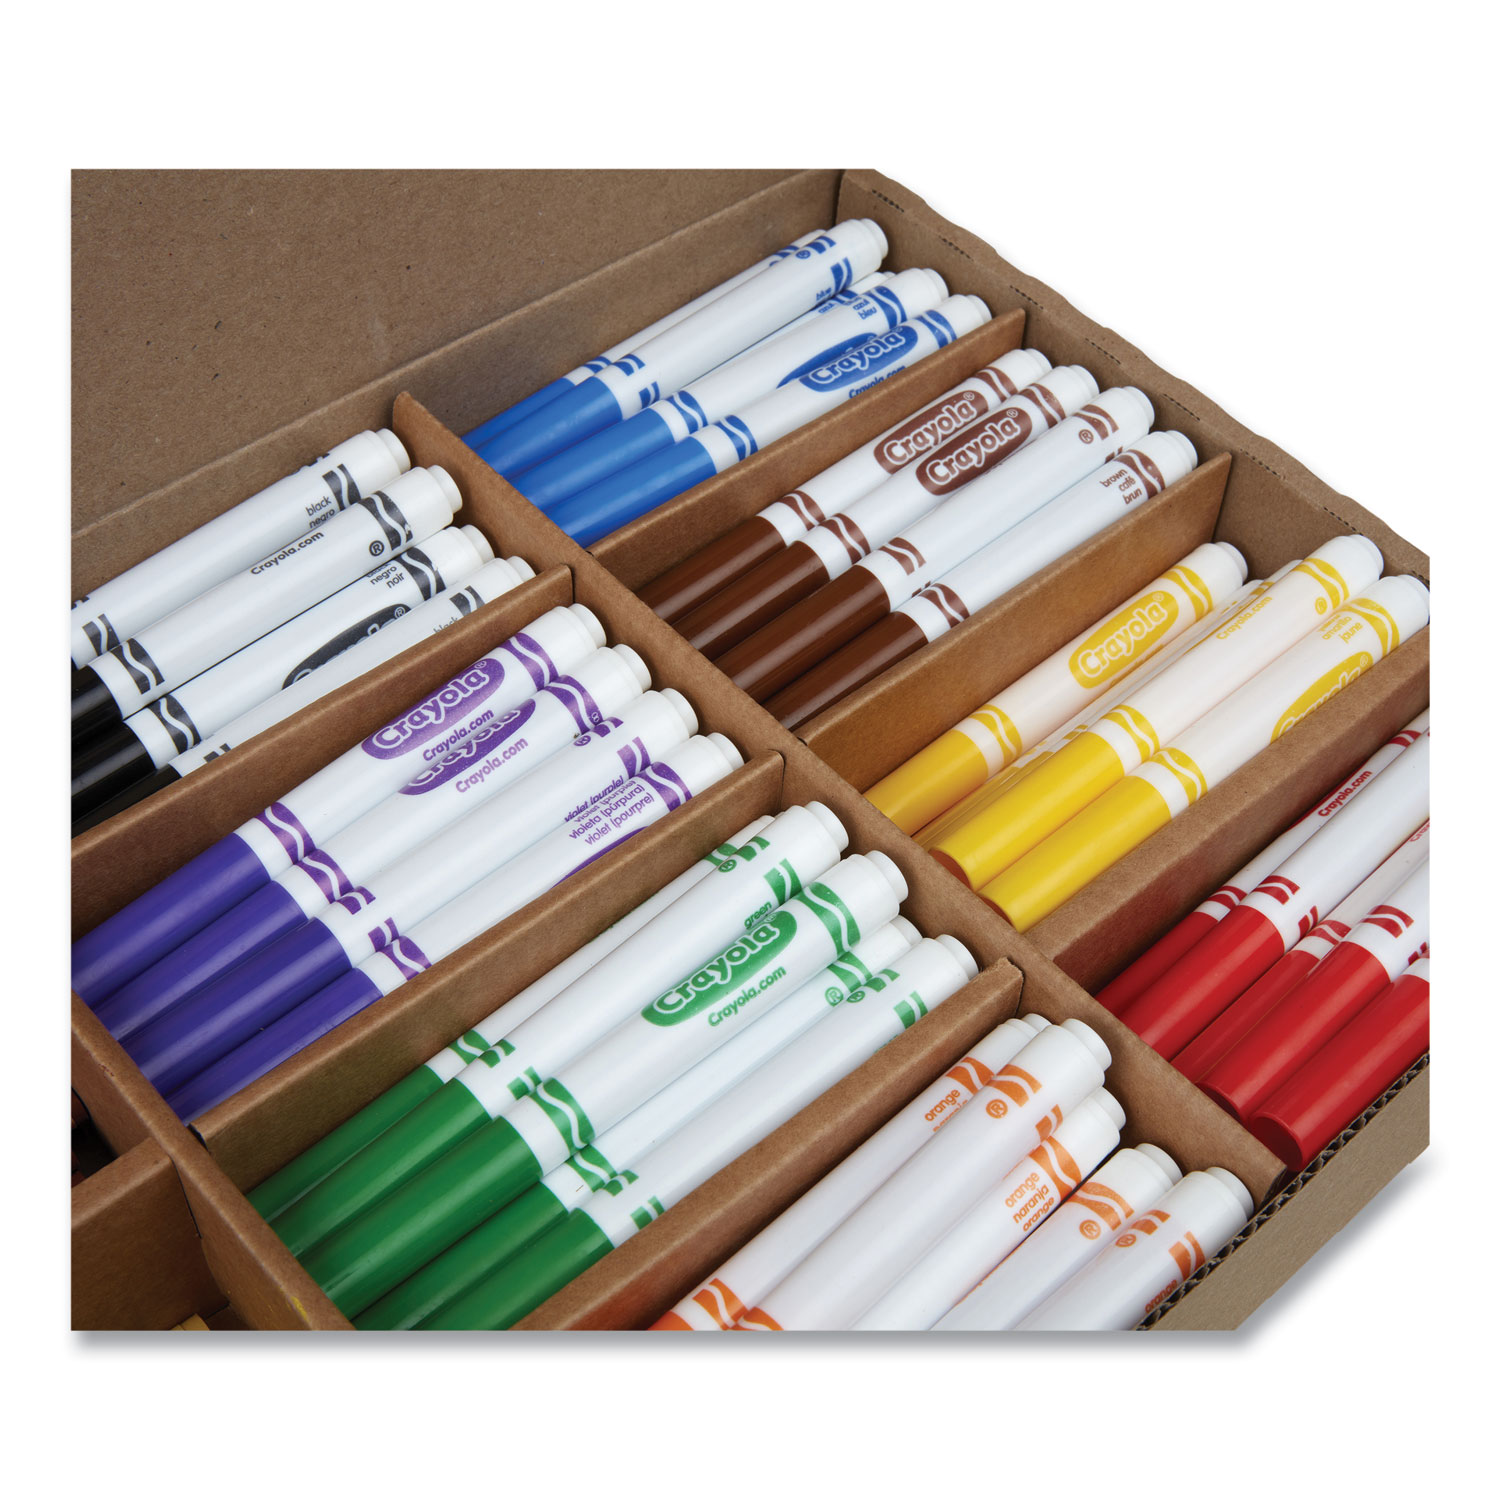 Crayons And Markers Combo Classpack, Eight Colors, 256/set | Bundle of 5